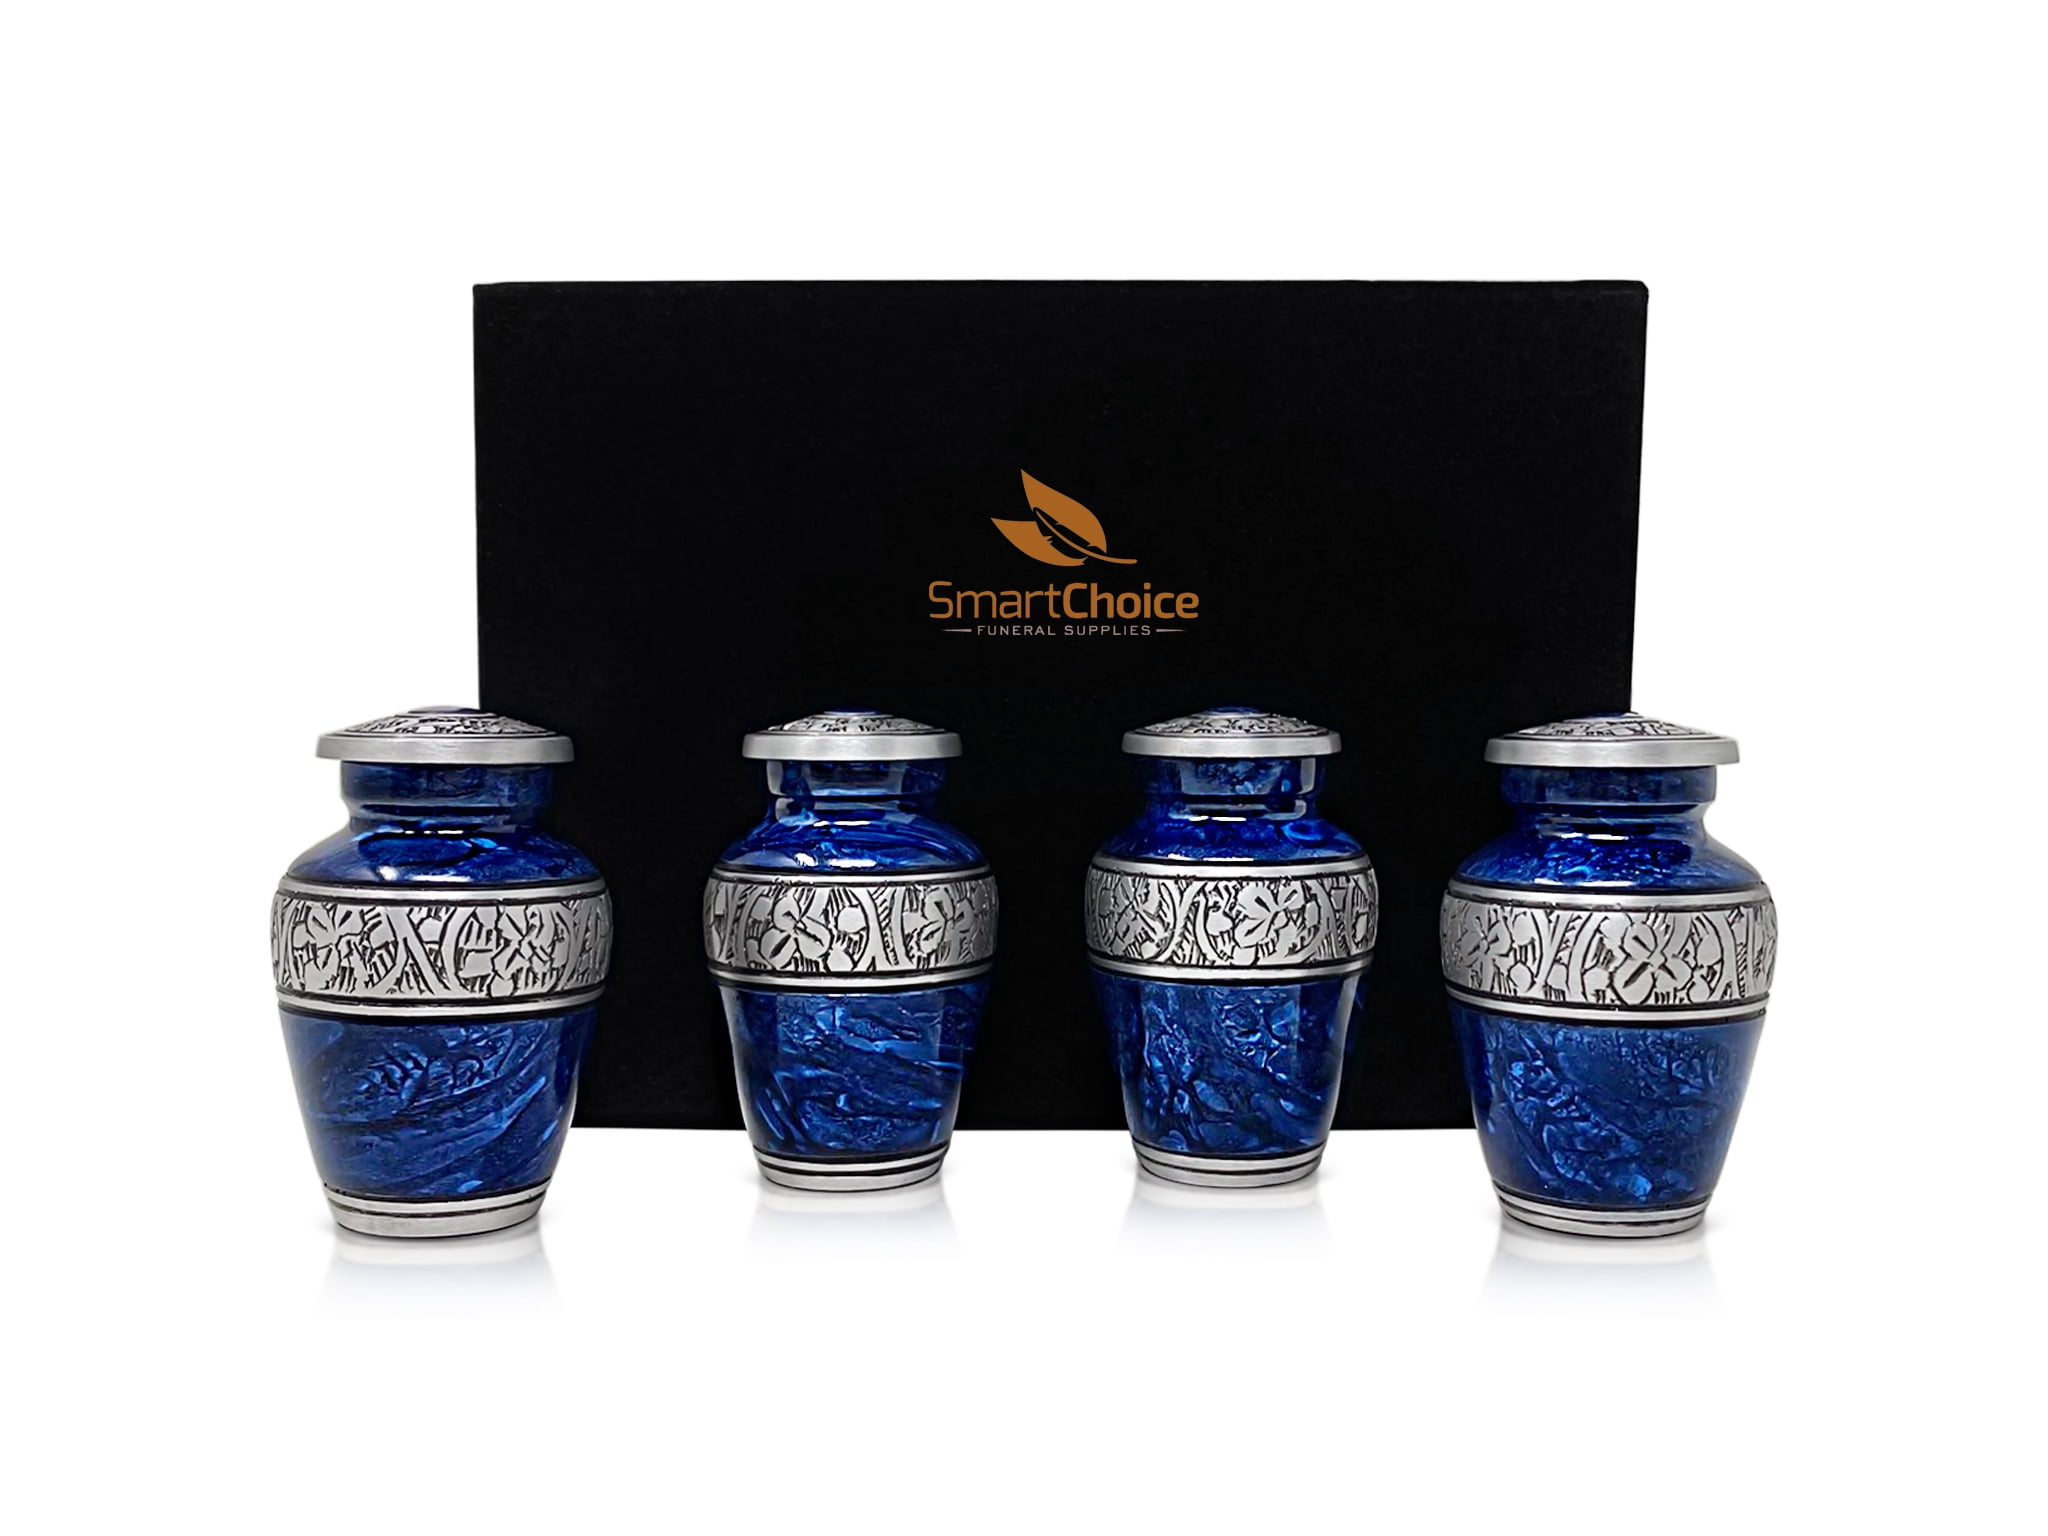 Set of 4 SmartChoice Keepsake Cremation Urns for Human Ashes - Handcrafted Funeral  Memorial Mini Urns 